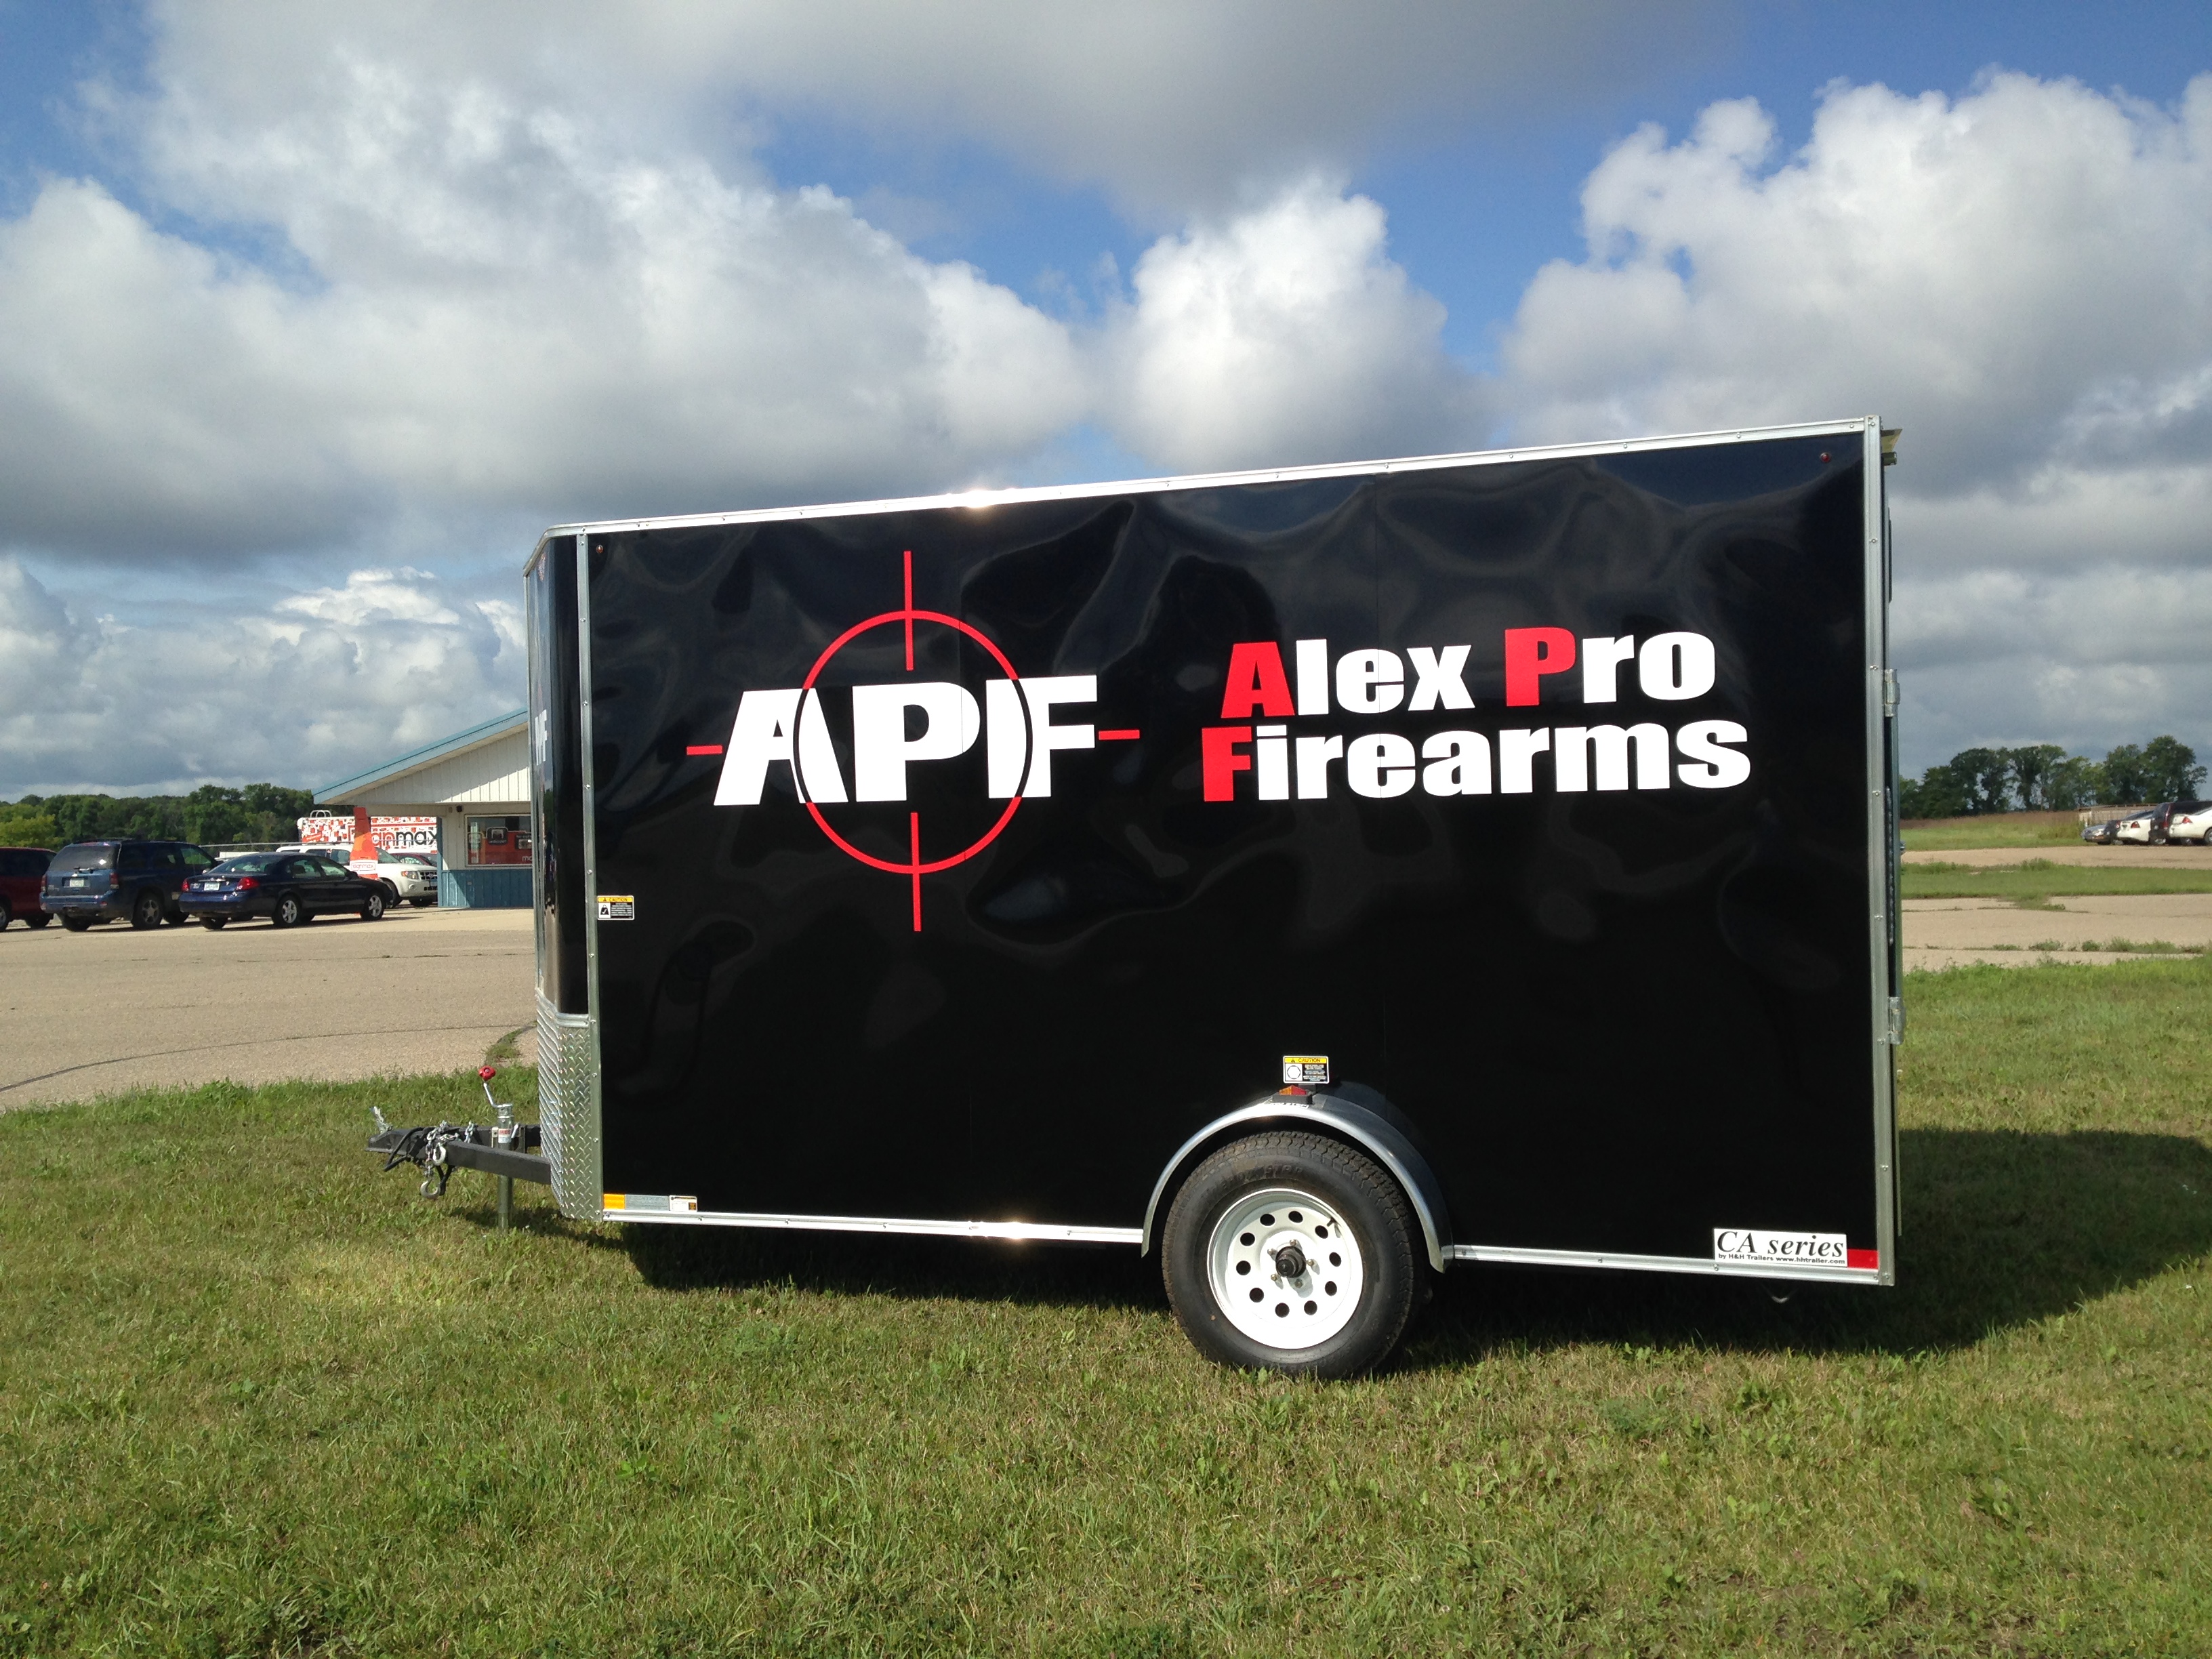 Alex Pro Firearms Trailer Wrap - Printed & Installed by Signmax